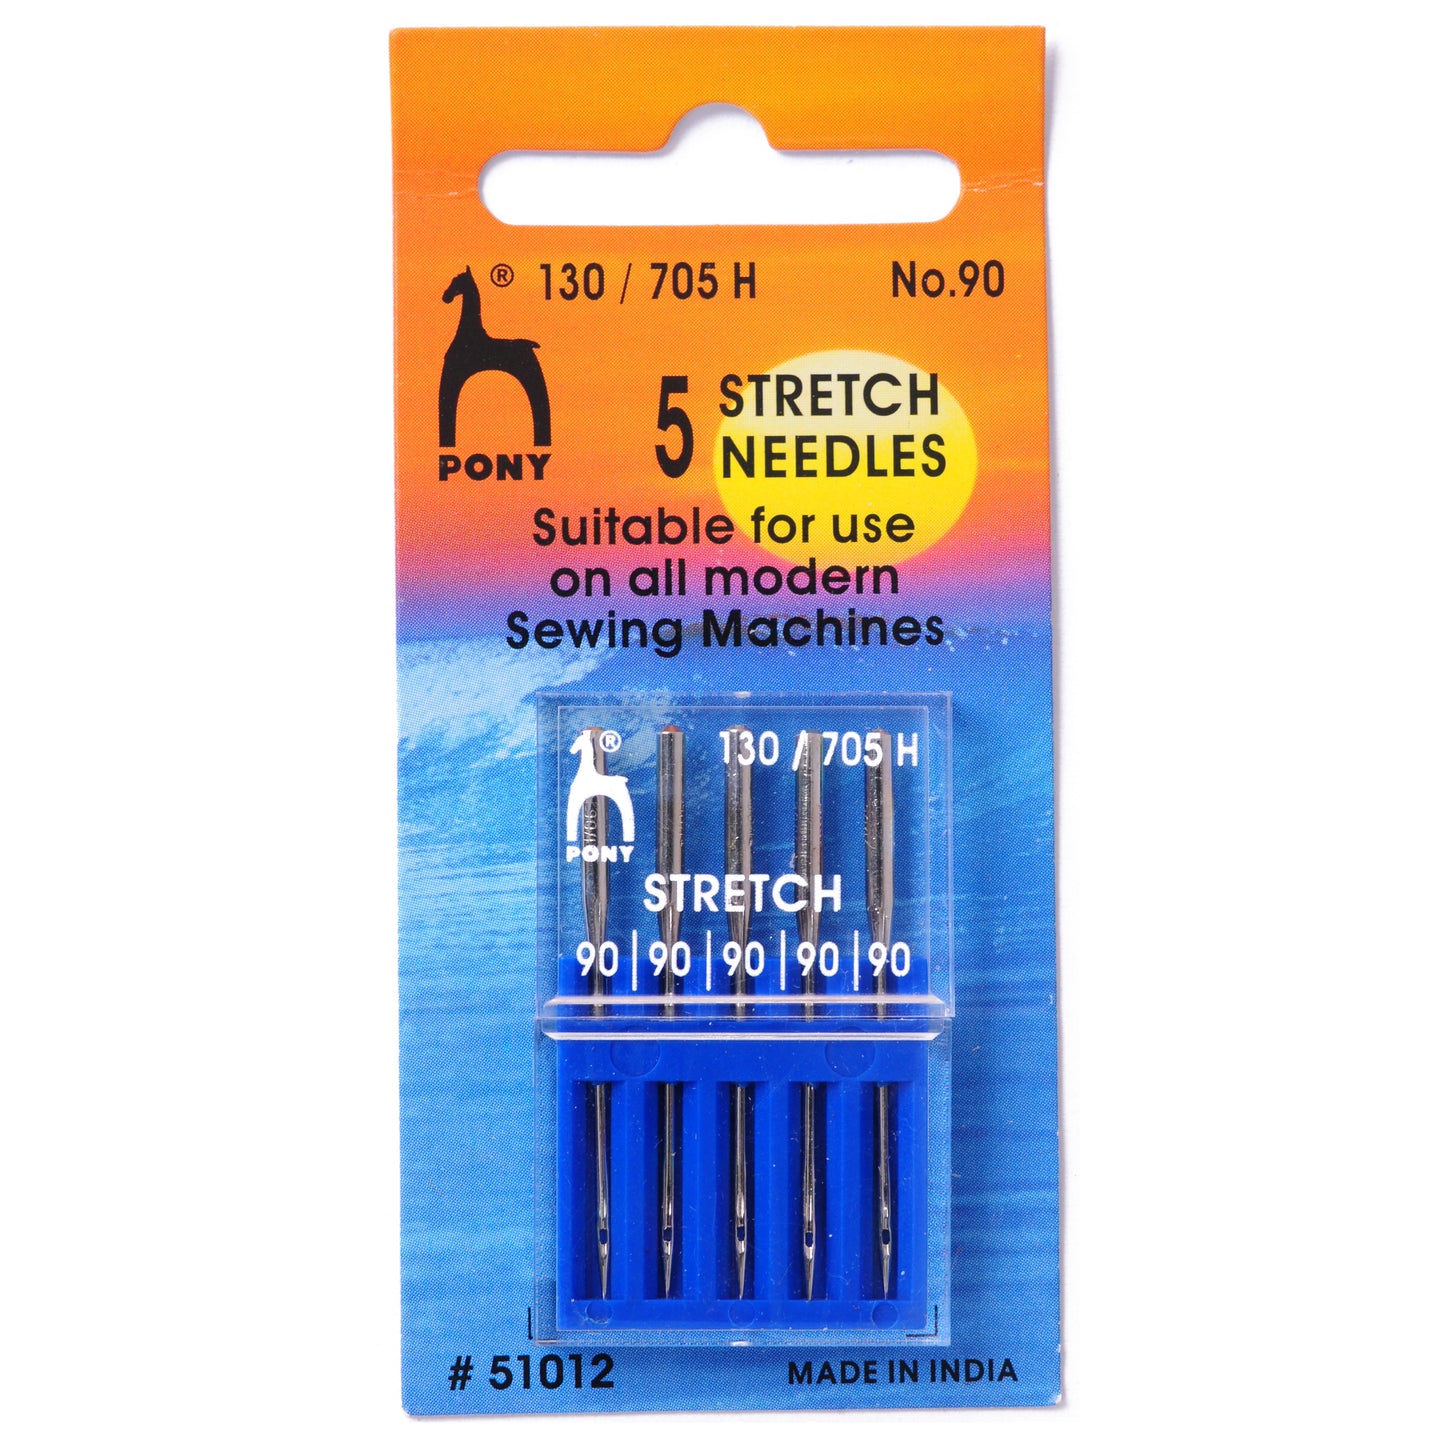 Pony Stretch Sewing Machine Needles 5 Pack